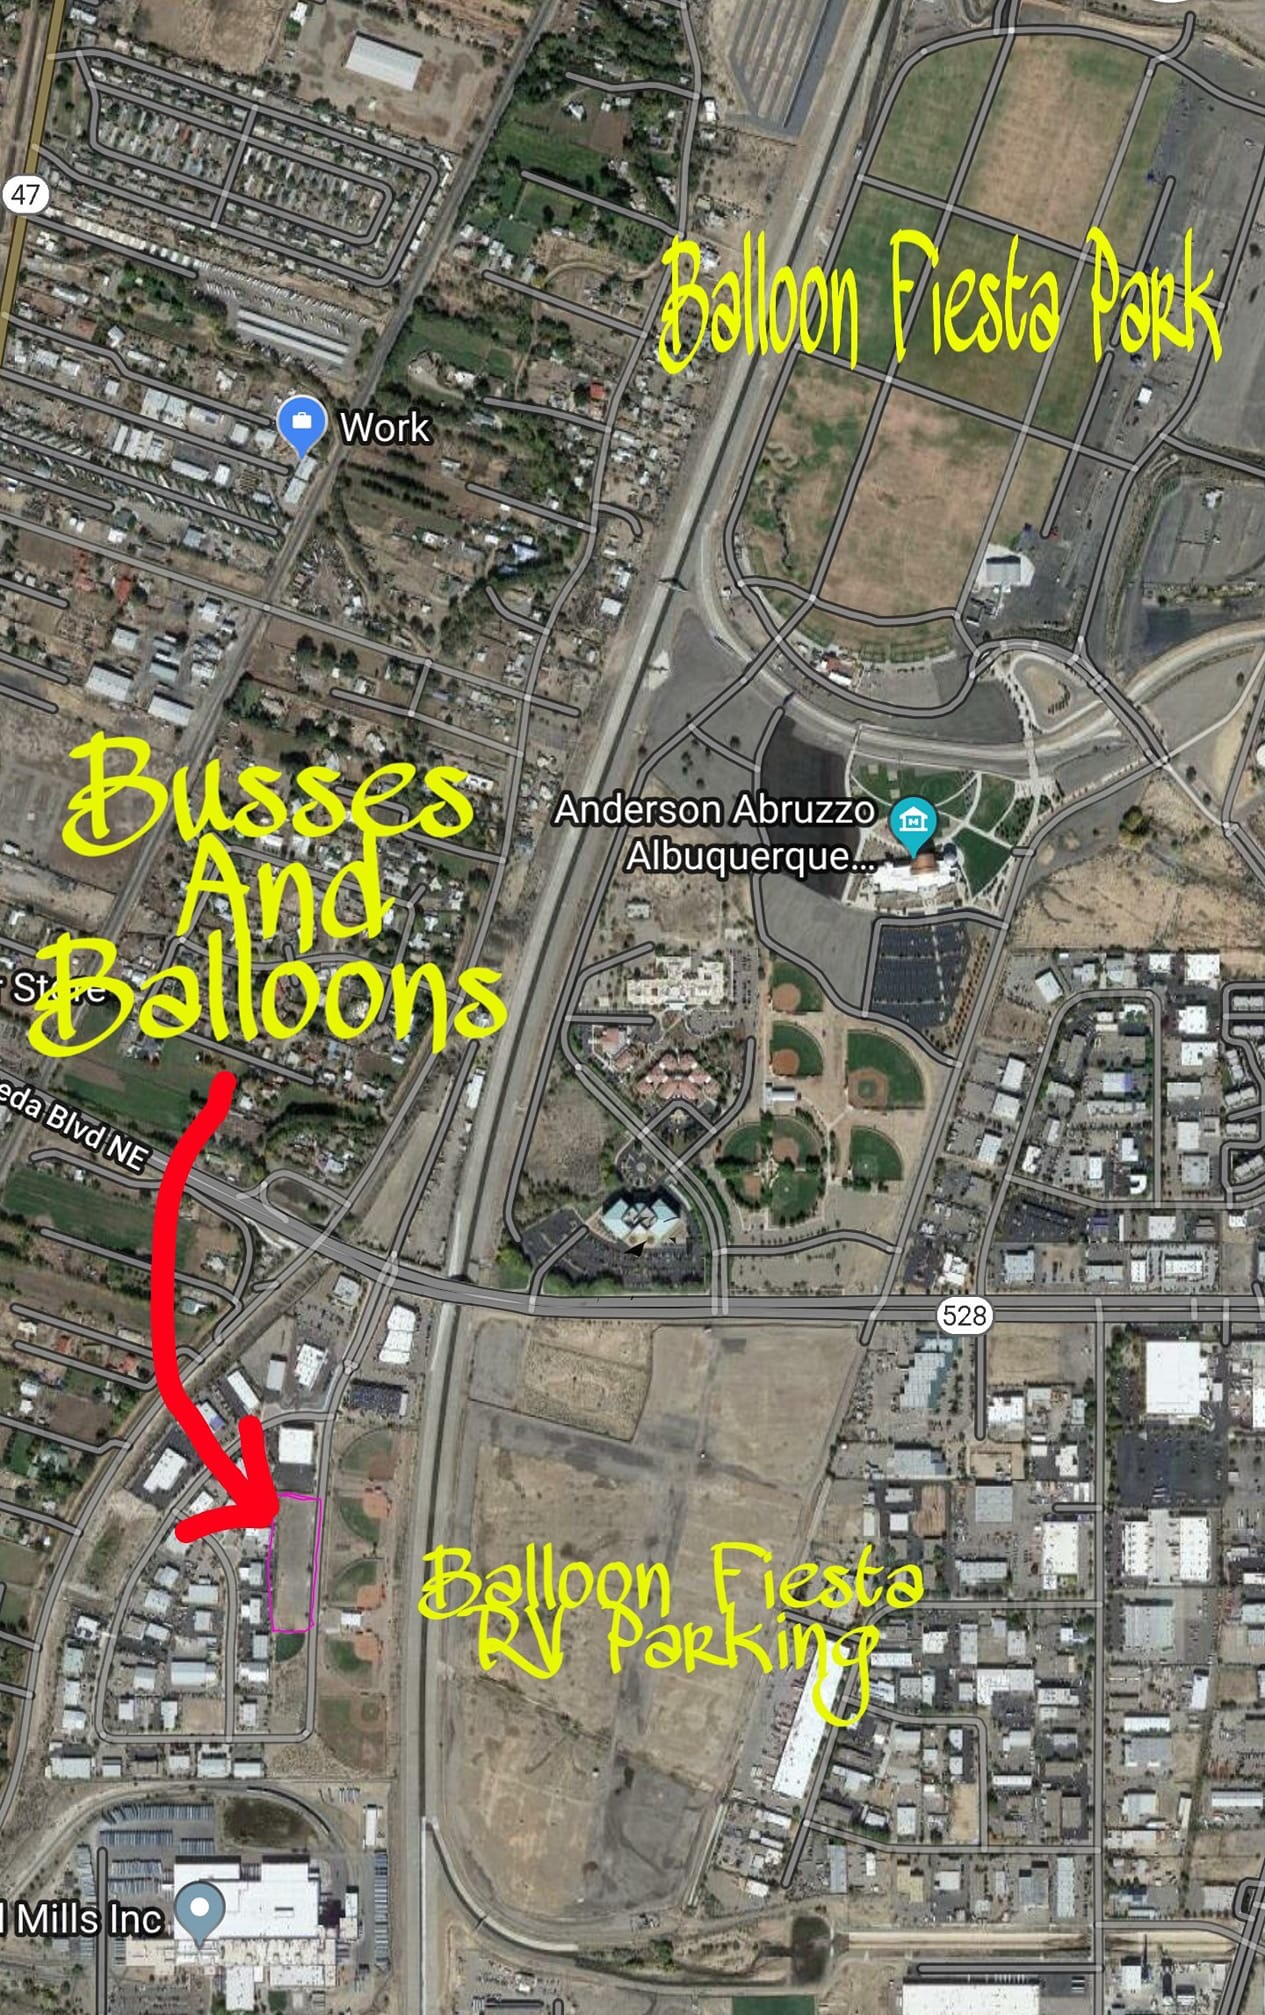 Buses and balloons, vw campout, vw camping, vw bus, Volkswagen campout, volkswagon campout, vanagon, Westy